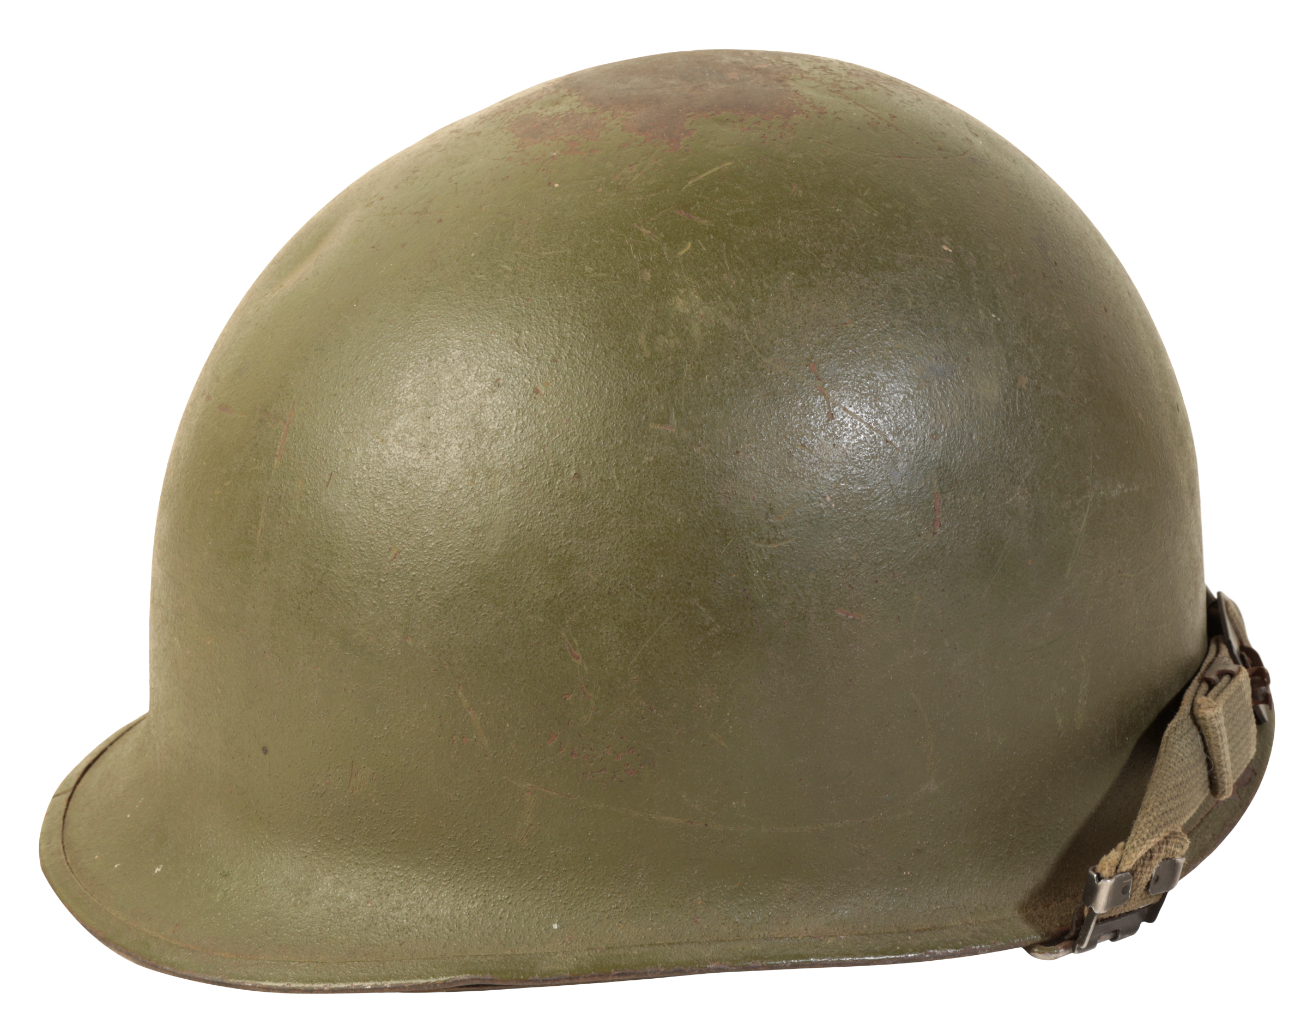 A WWII AMERICAN M1 HELMET with 3adeaa